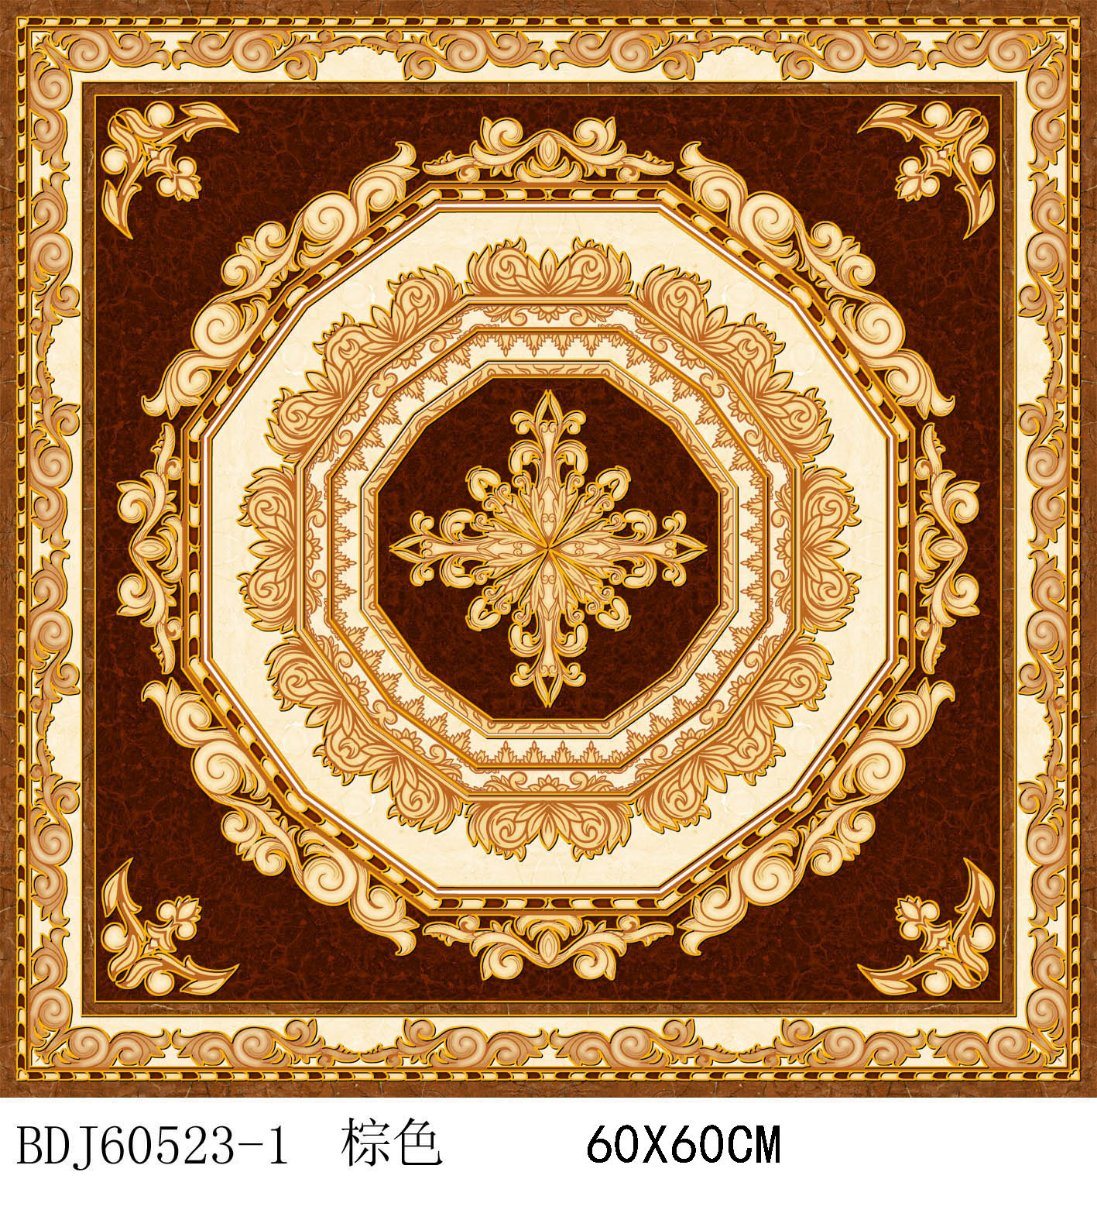 New Design Polished Golden Carpet Tiles with Cheap Price (BDJ60523-1)